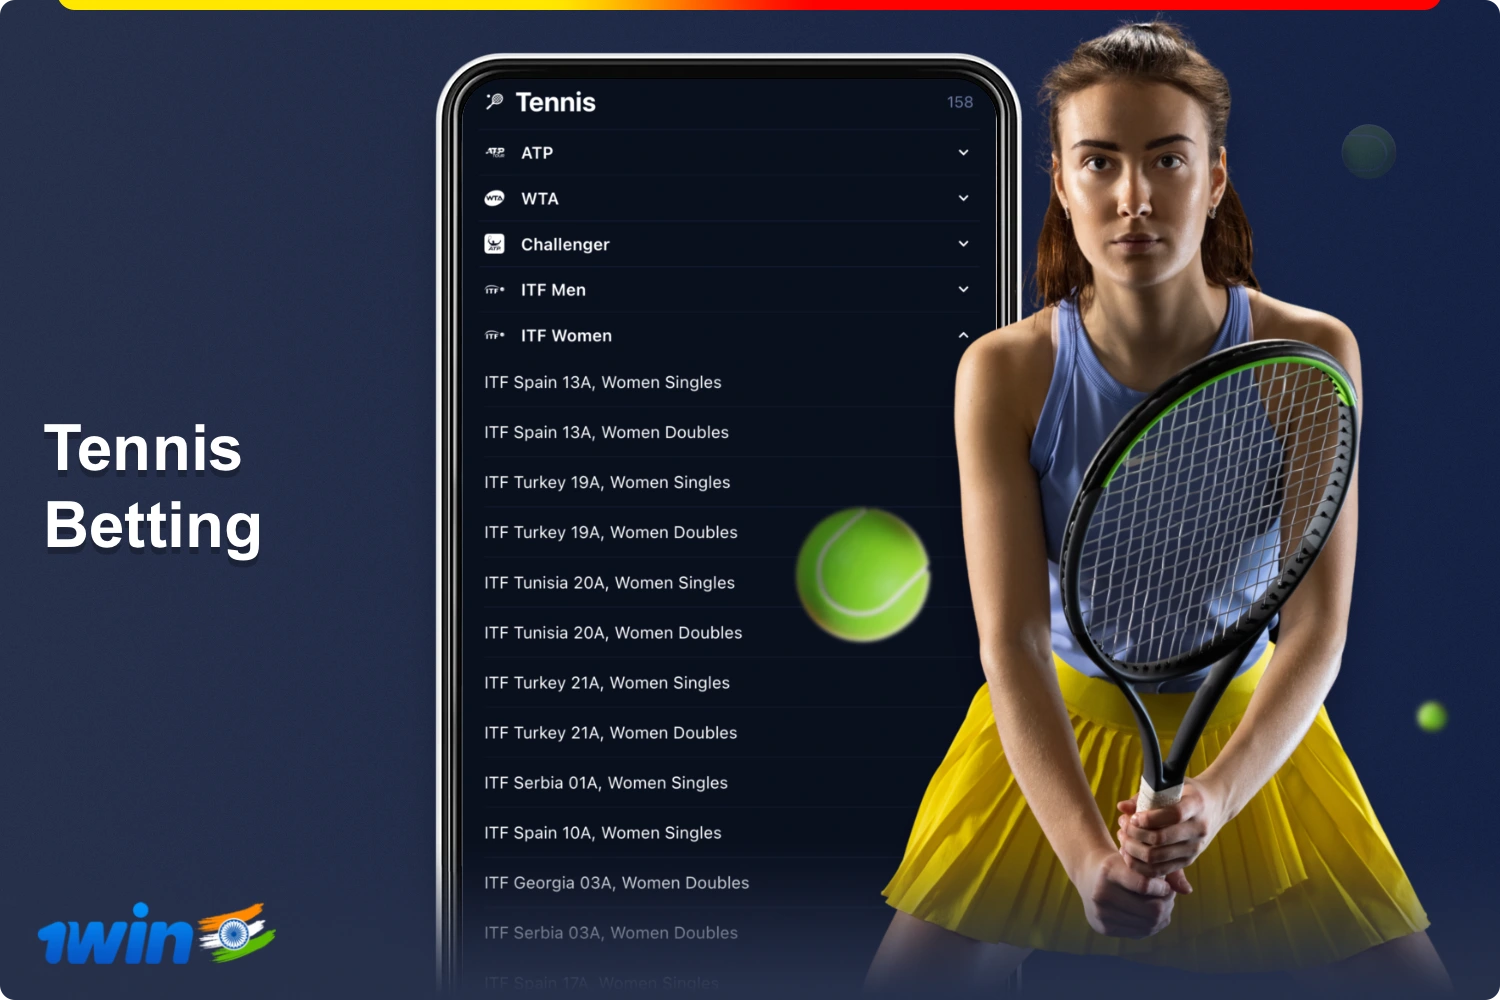 A wide range of tennis betting is available to Indian users on the 1win platform